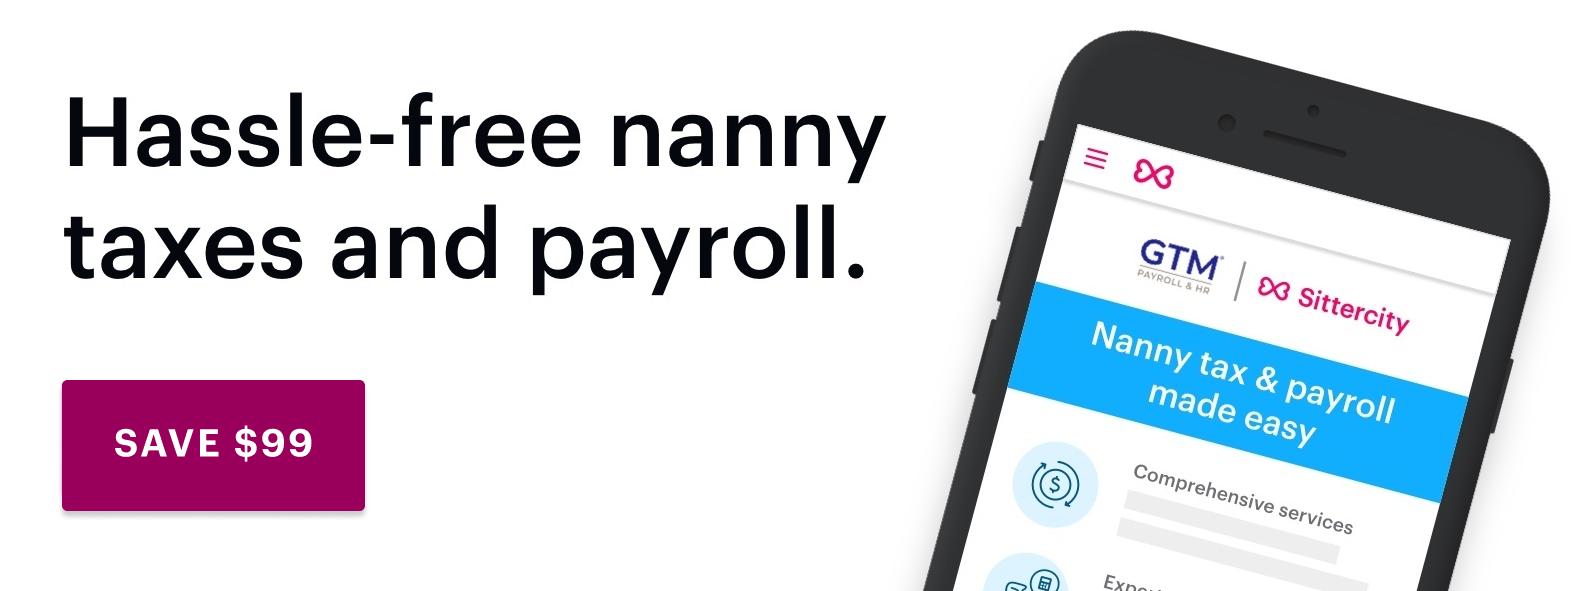 Banner image showing a phone and text that says, "Hassle-free nanny taxes and payroll."